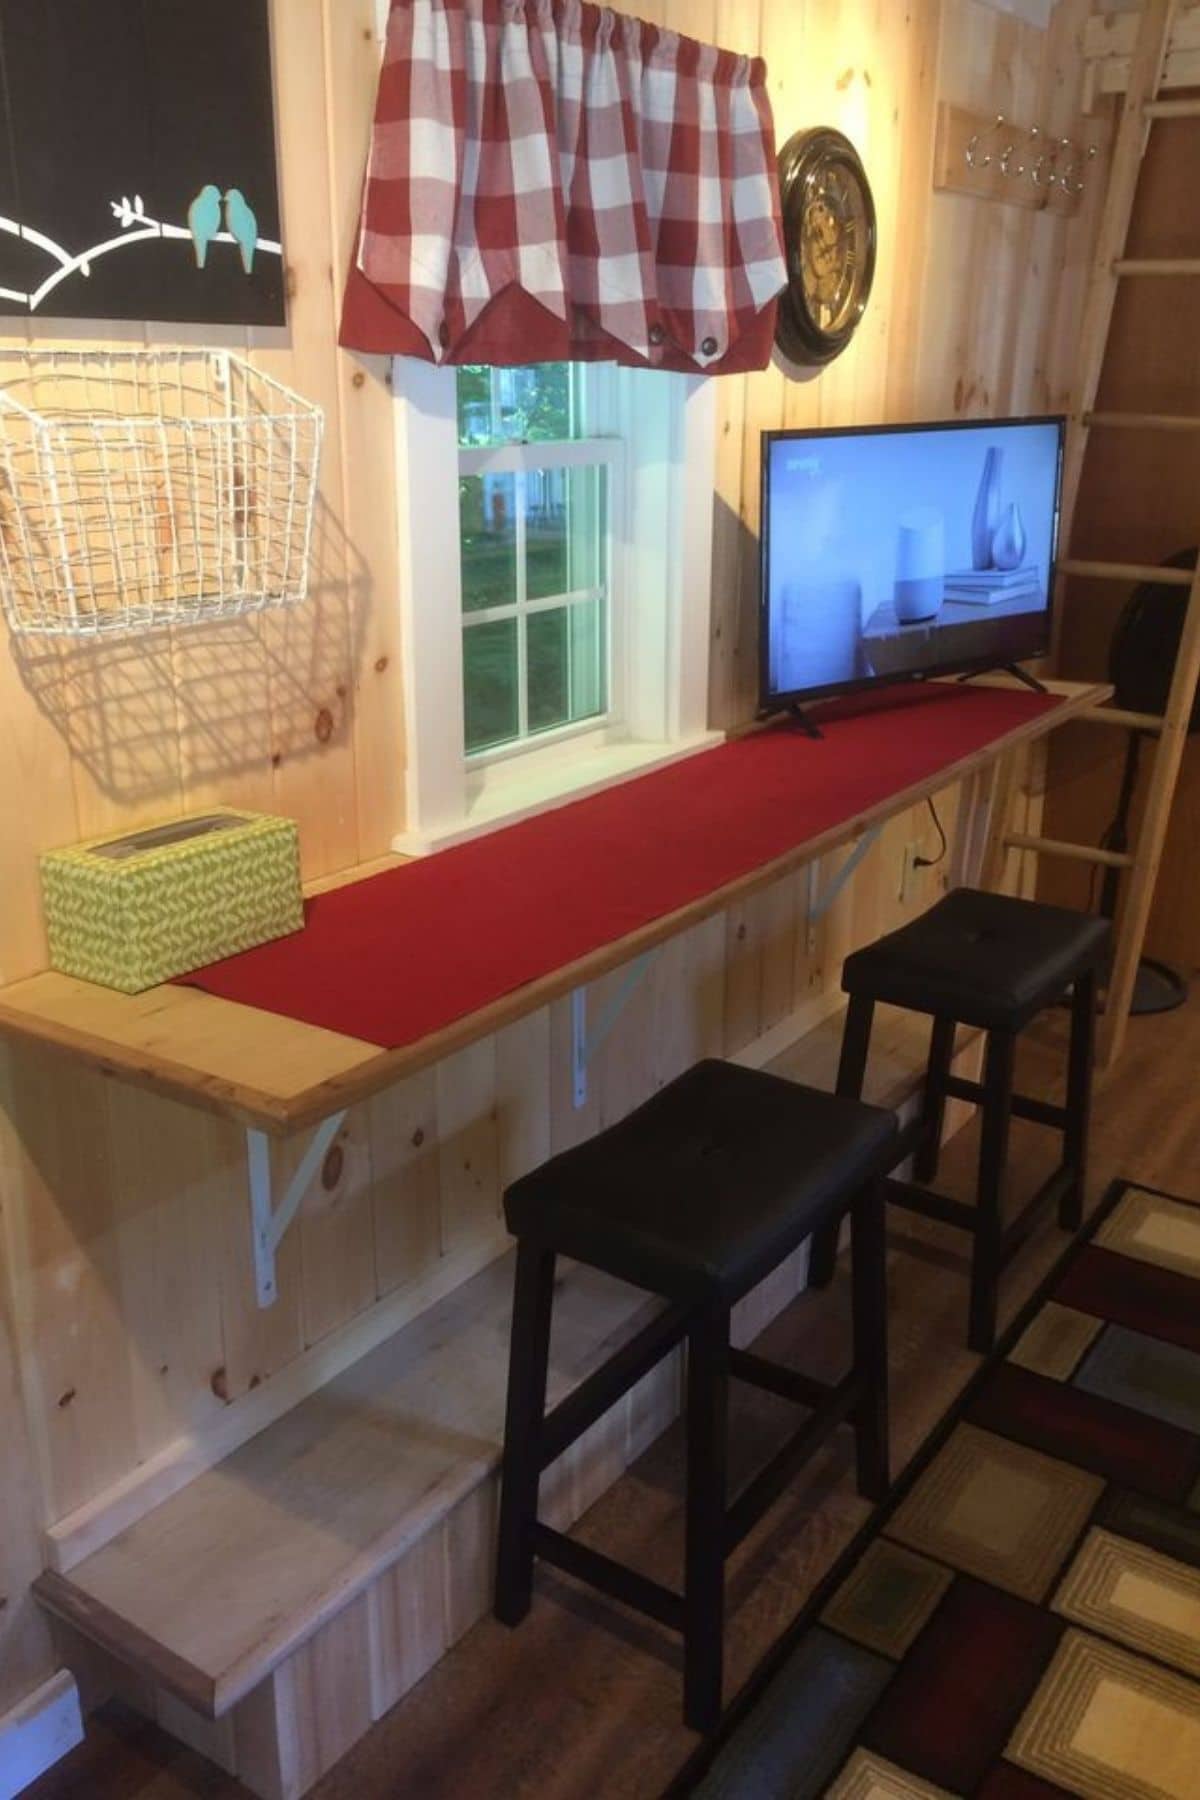 counter under window with two stools beneath and red tablerunner on top